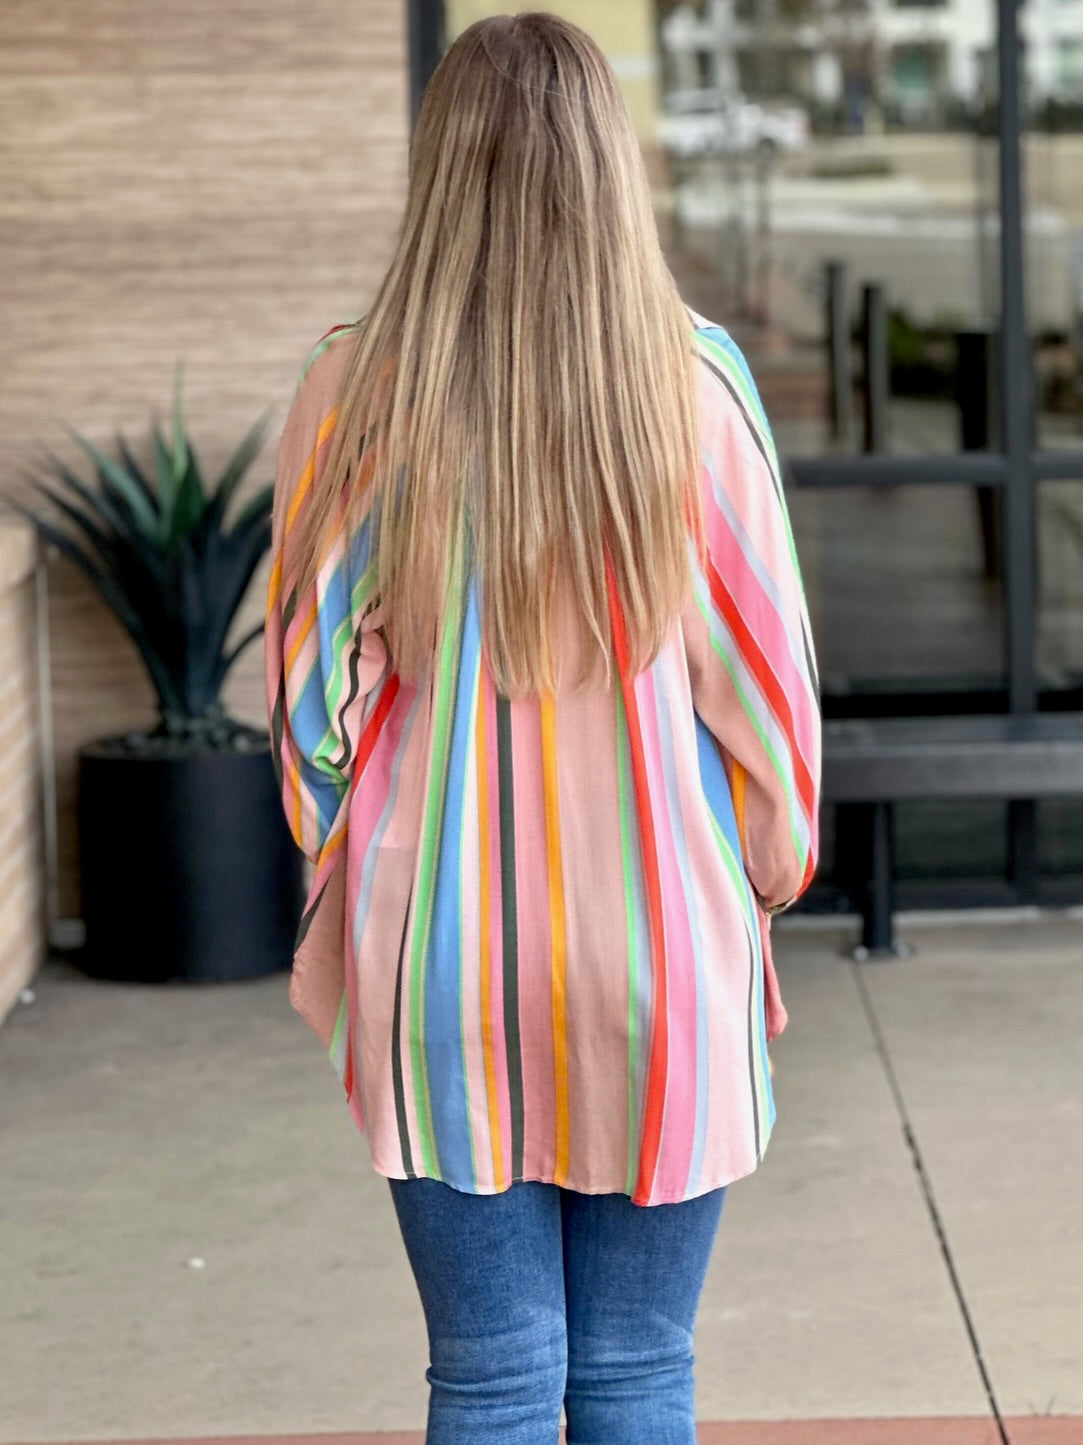 Lexi in blue/pink tunic dress back view